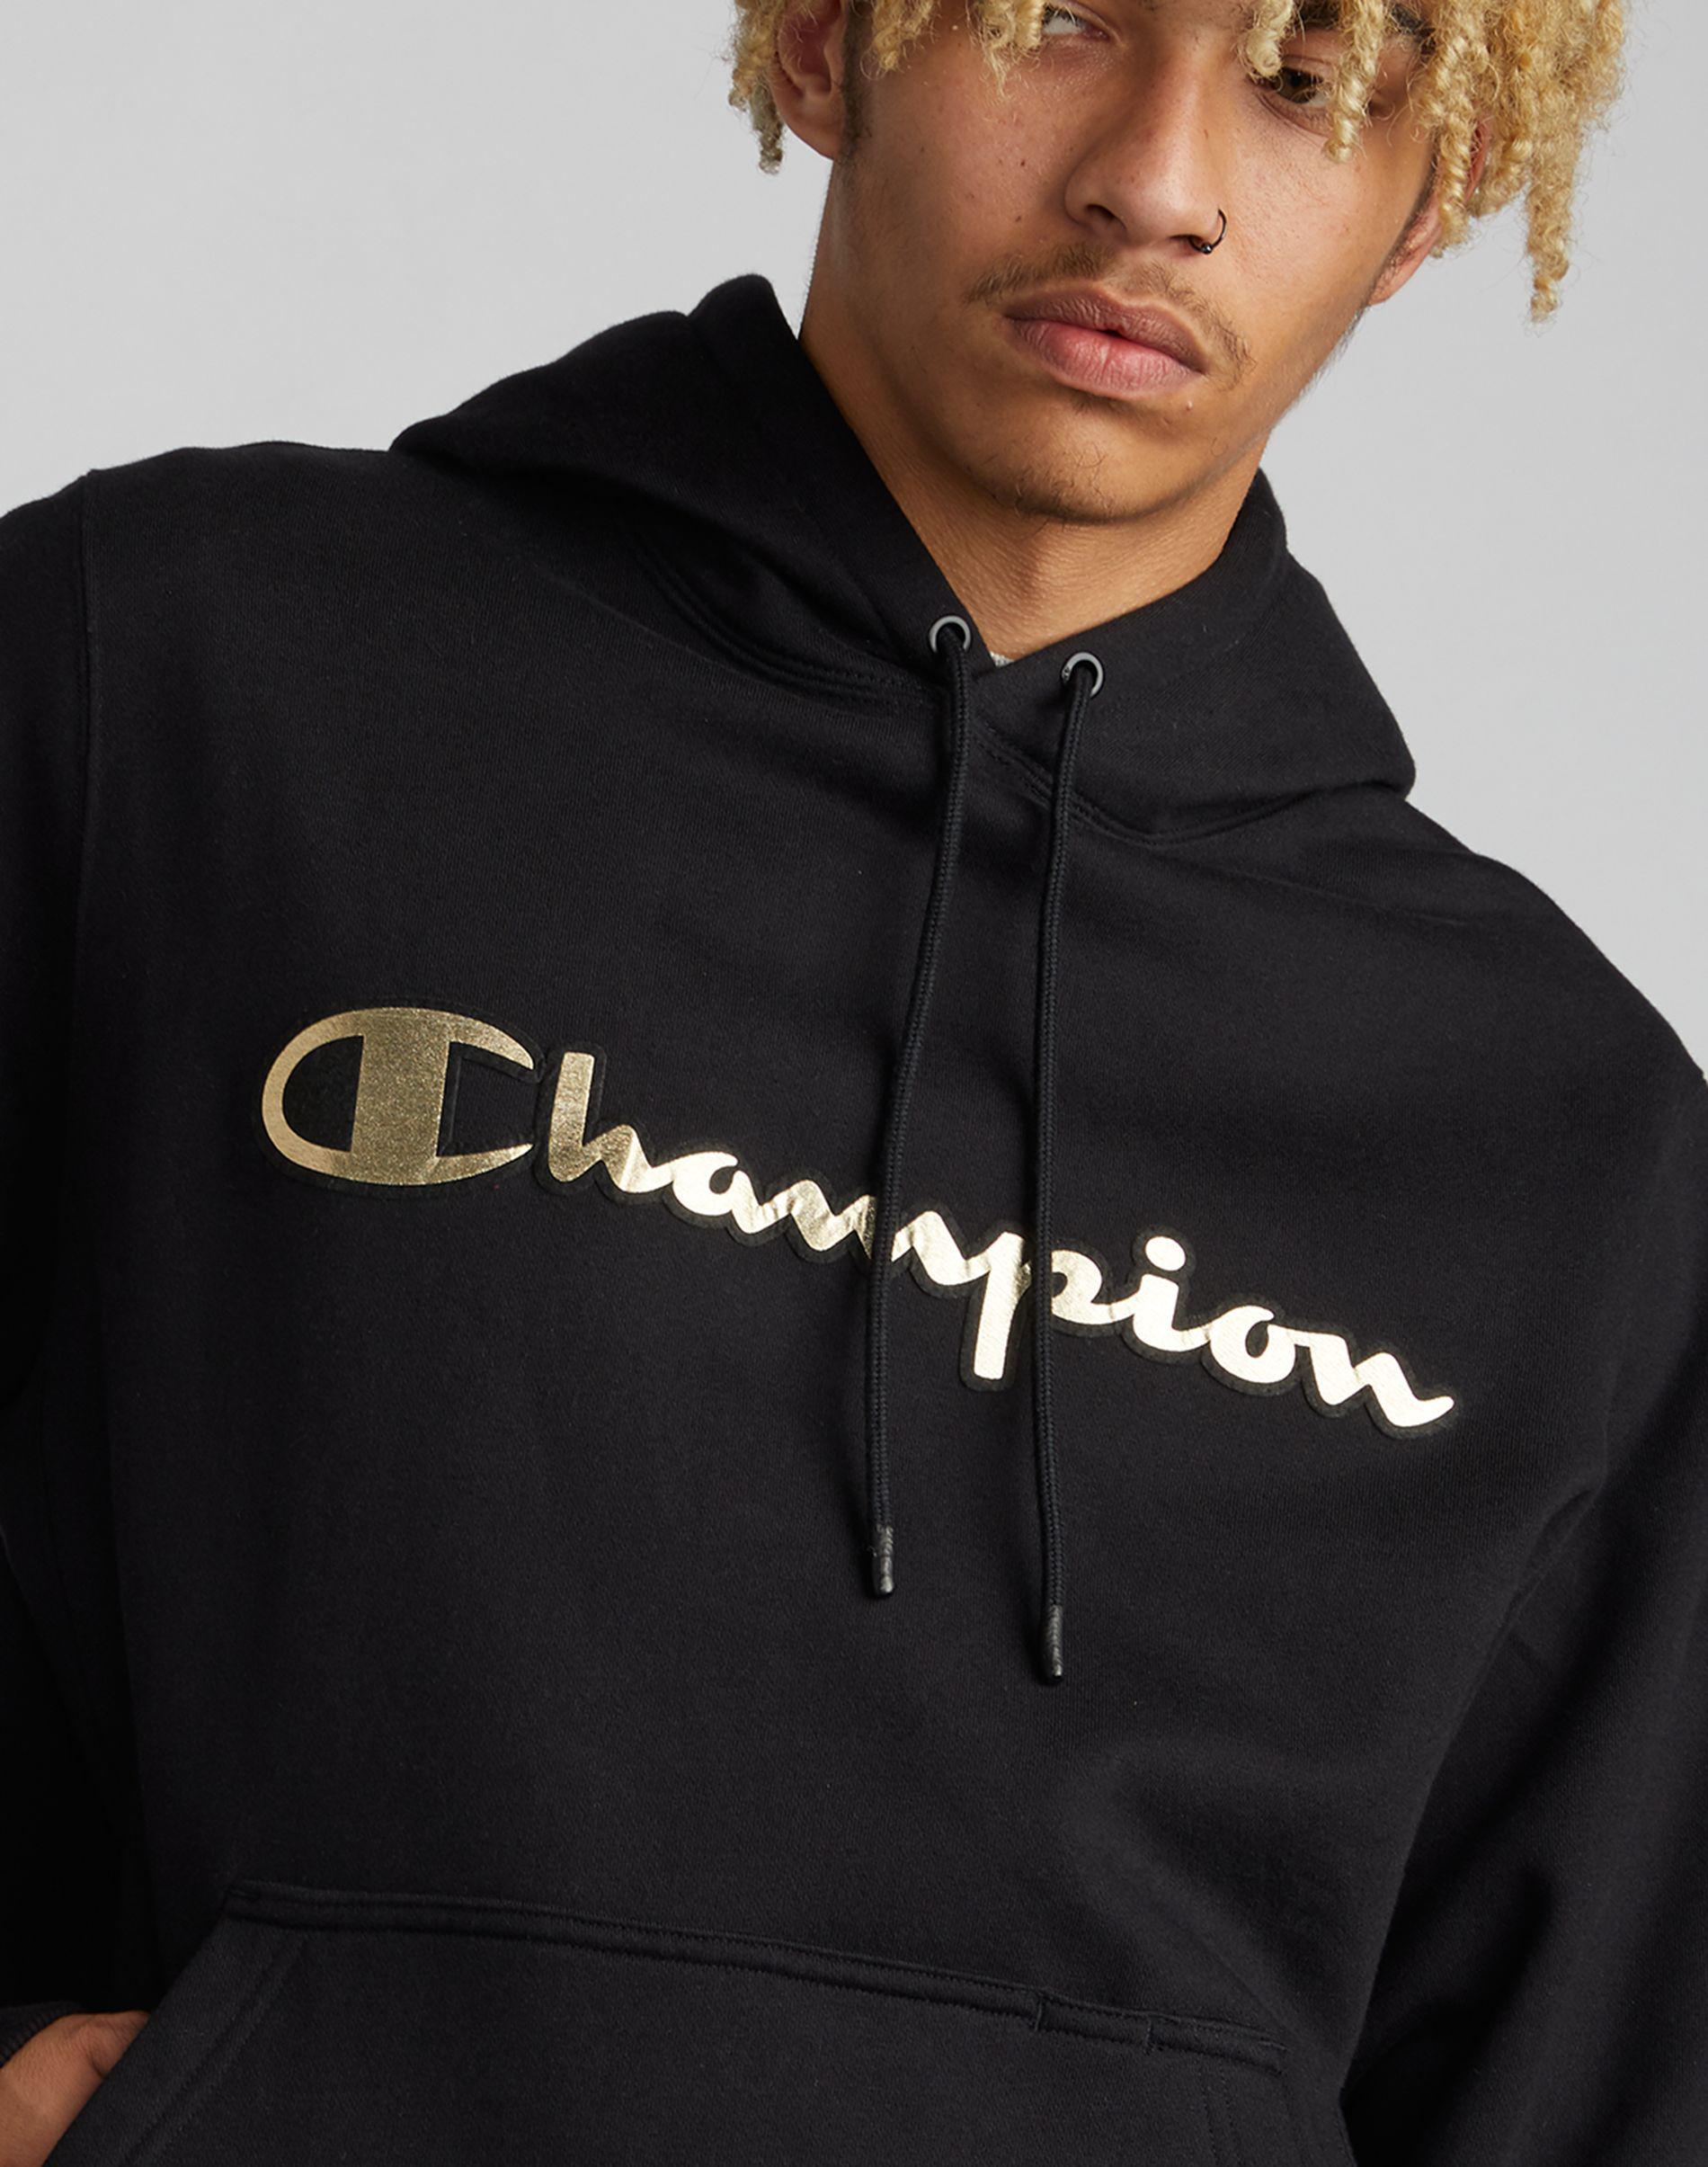 black and gold champion hoodie